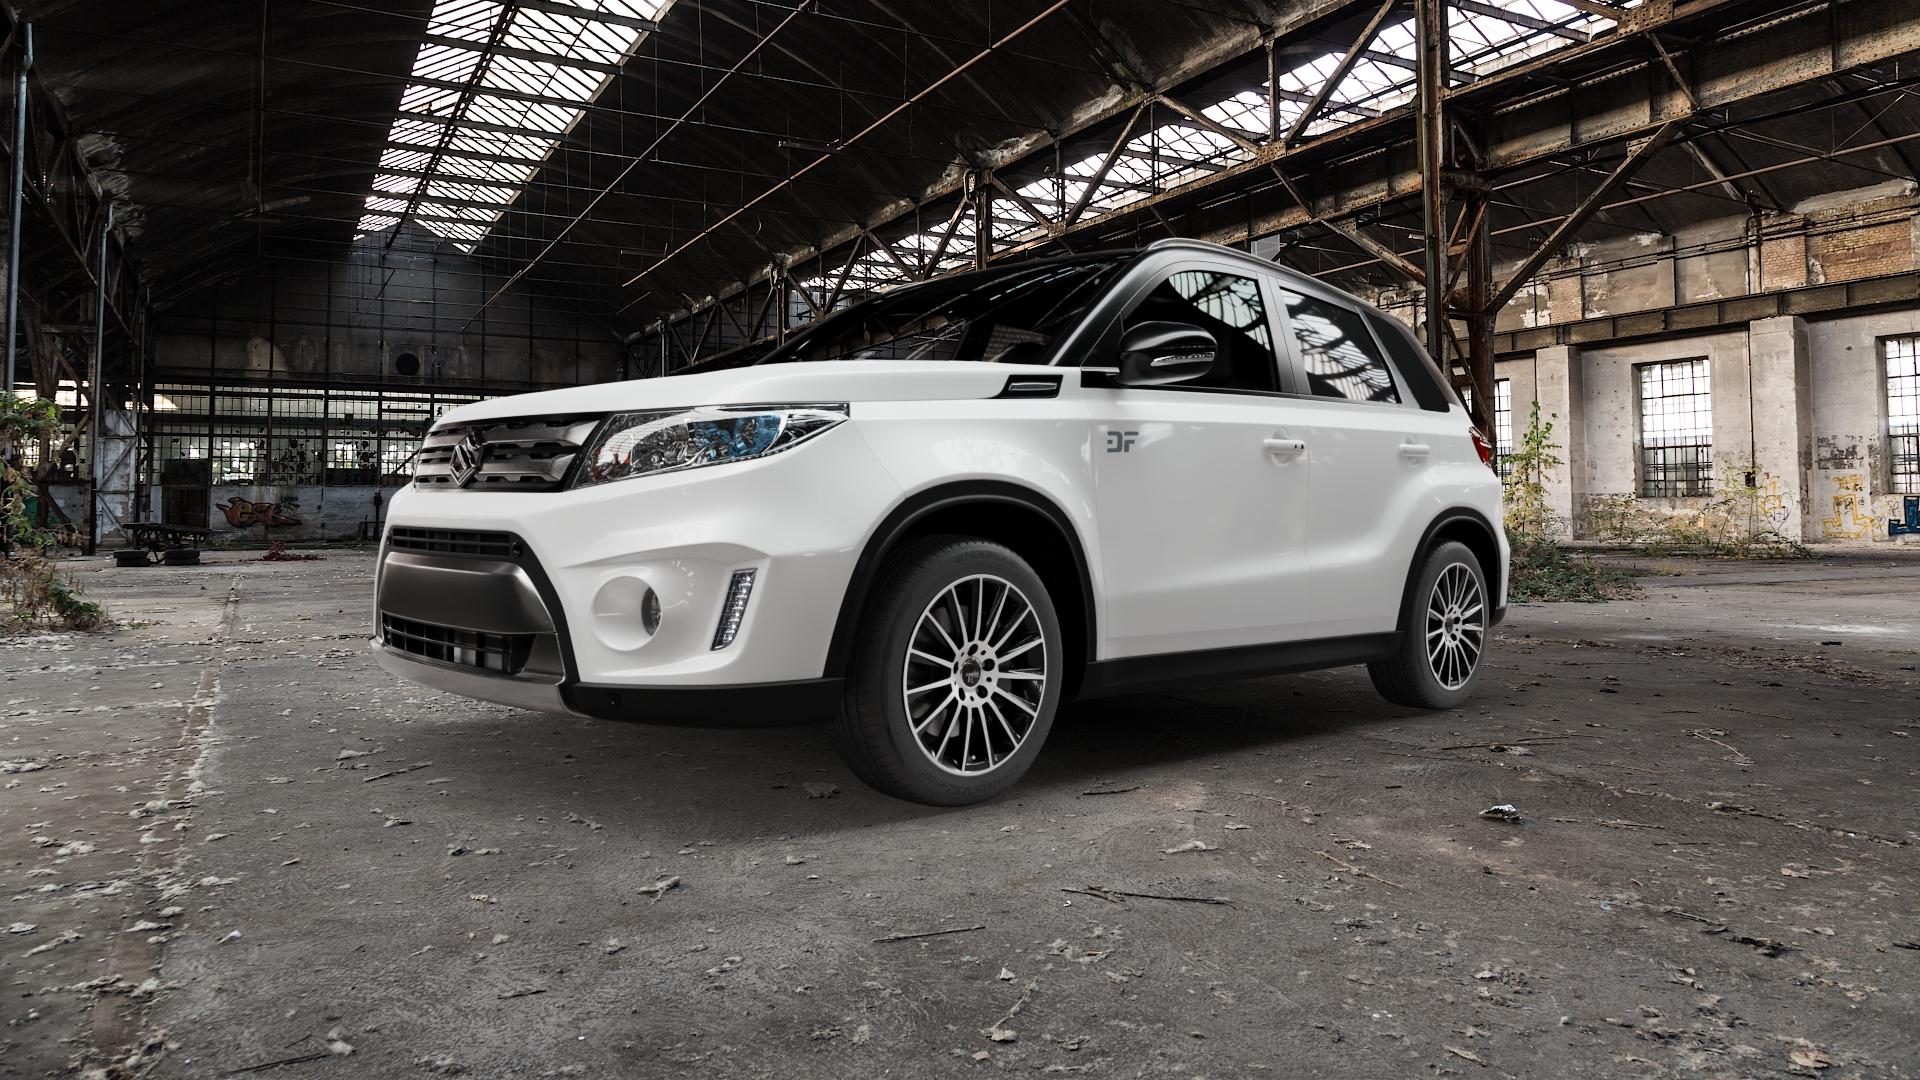 Suzuki Vitara Type LY 1,6l D 88kW (120 hp) Wheels and Tyre Packages